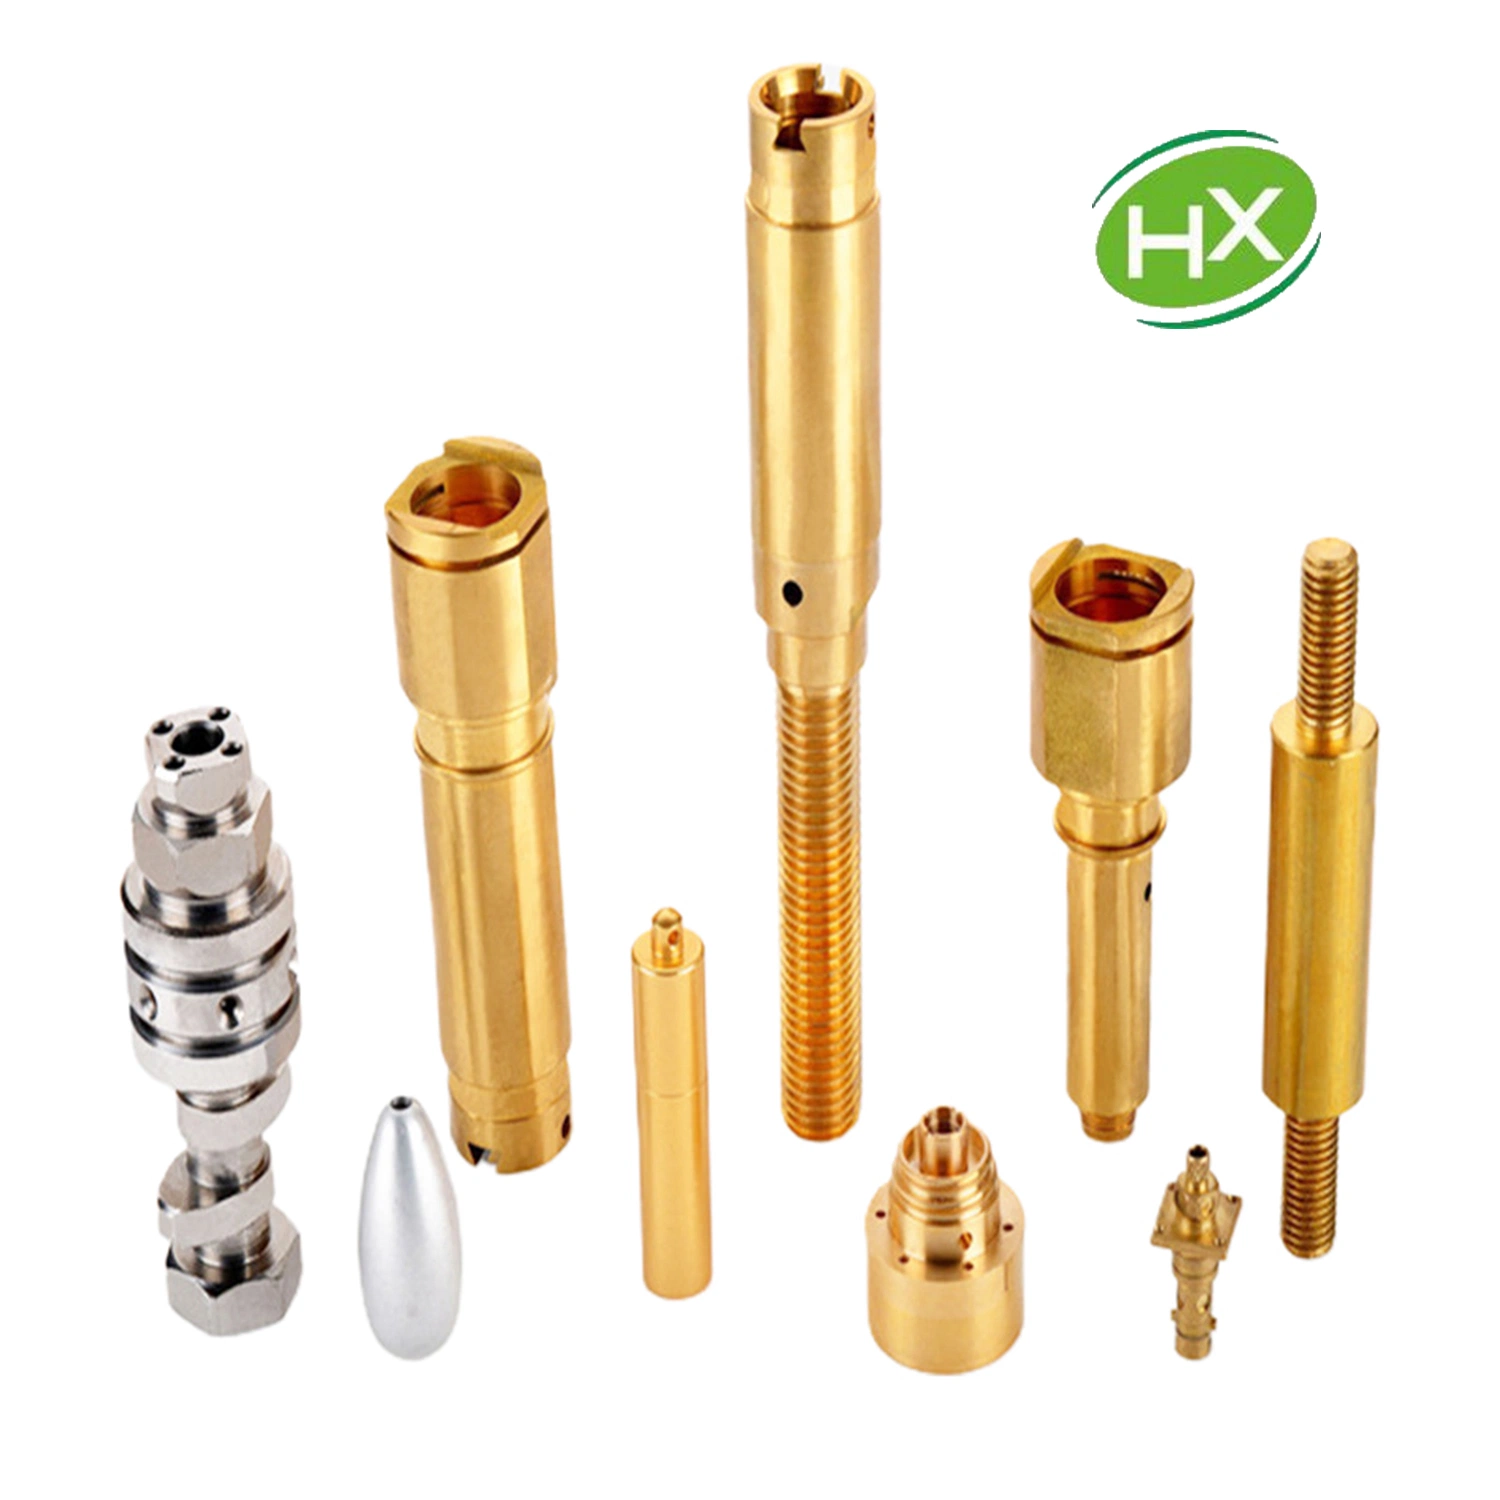 CNC Machinery Brass/Copper for Casting Motorcycle Parts/Metal Accessories